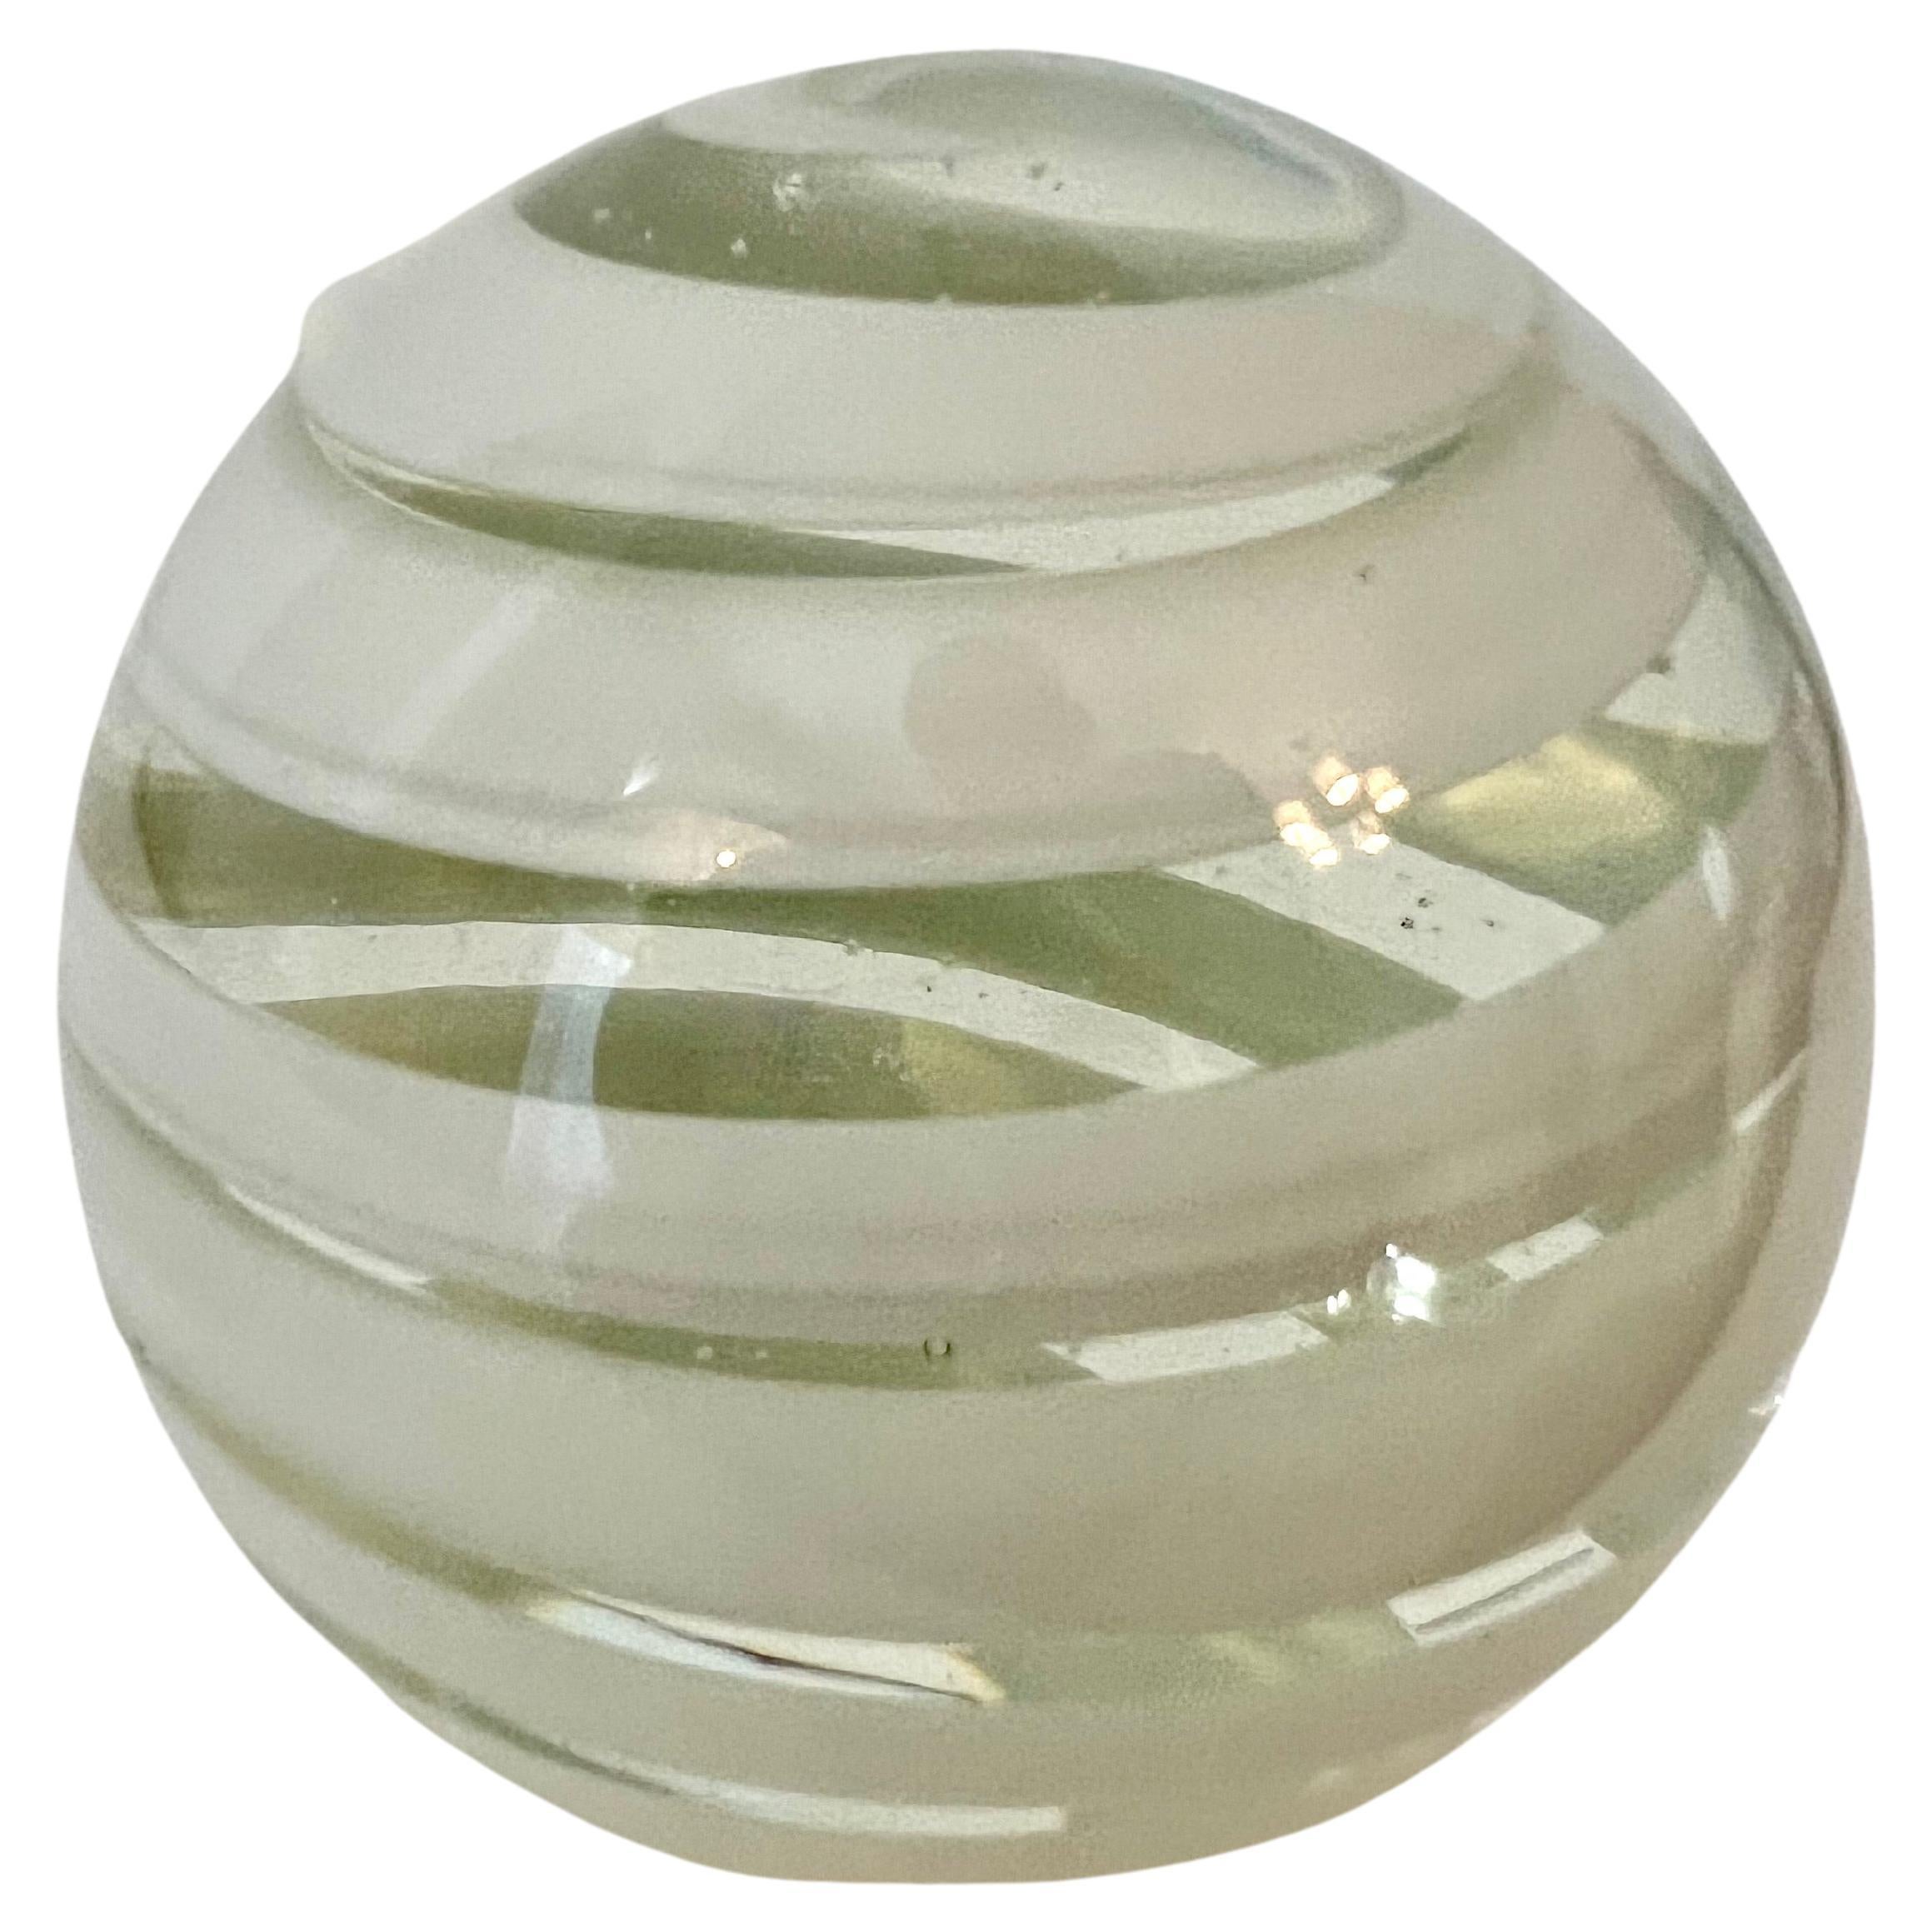 Paperweight with Swirl Details in the Style of Murano Glass 